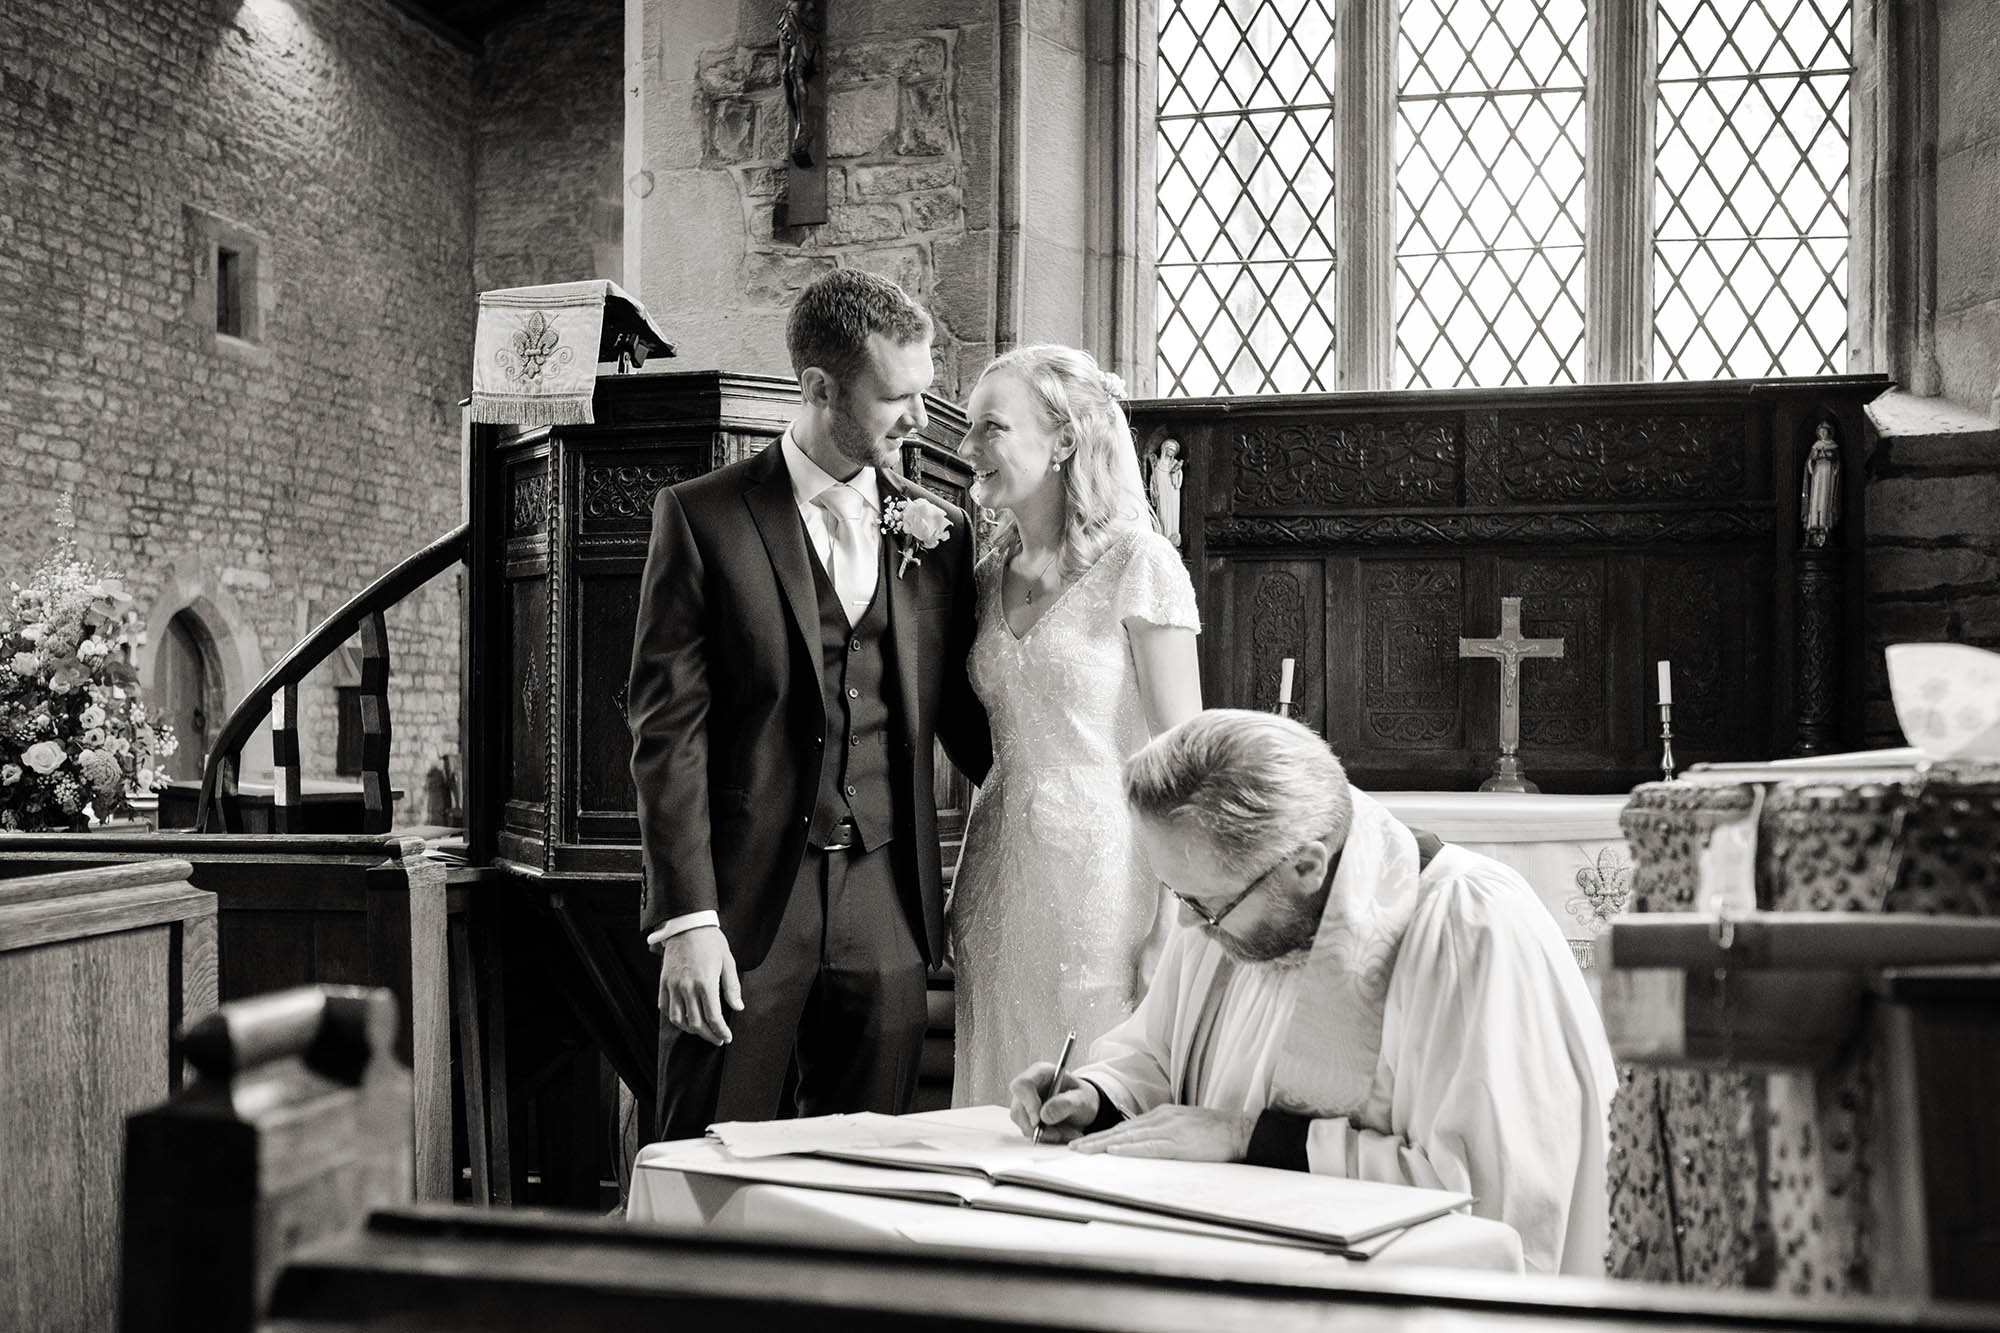 Newlyweds share a moment with a loving glance as the priest signs the marriage register - Sheffield wedding photographer John Mottershaw